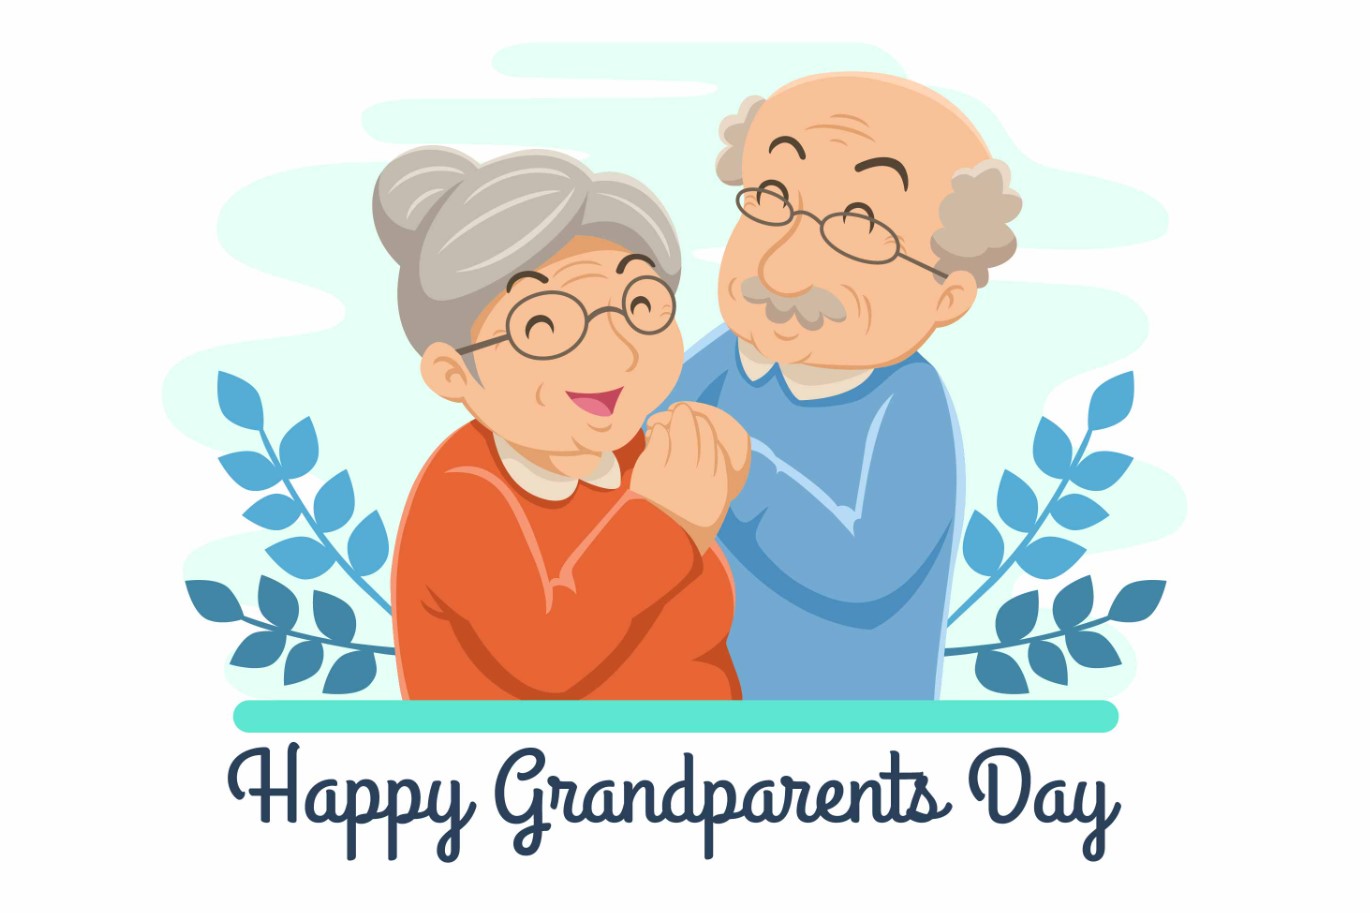 Grandparents Day Images